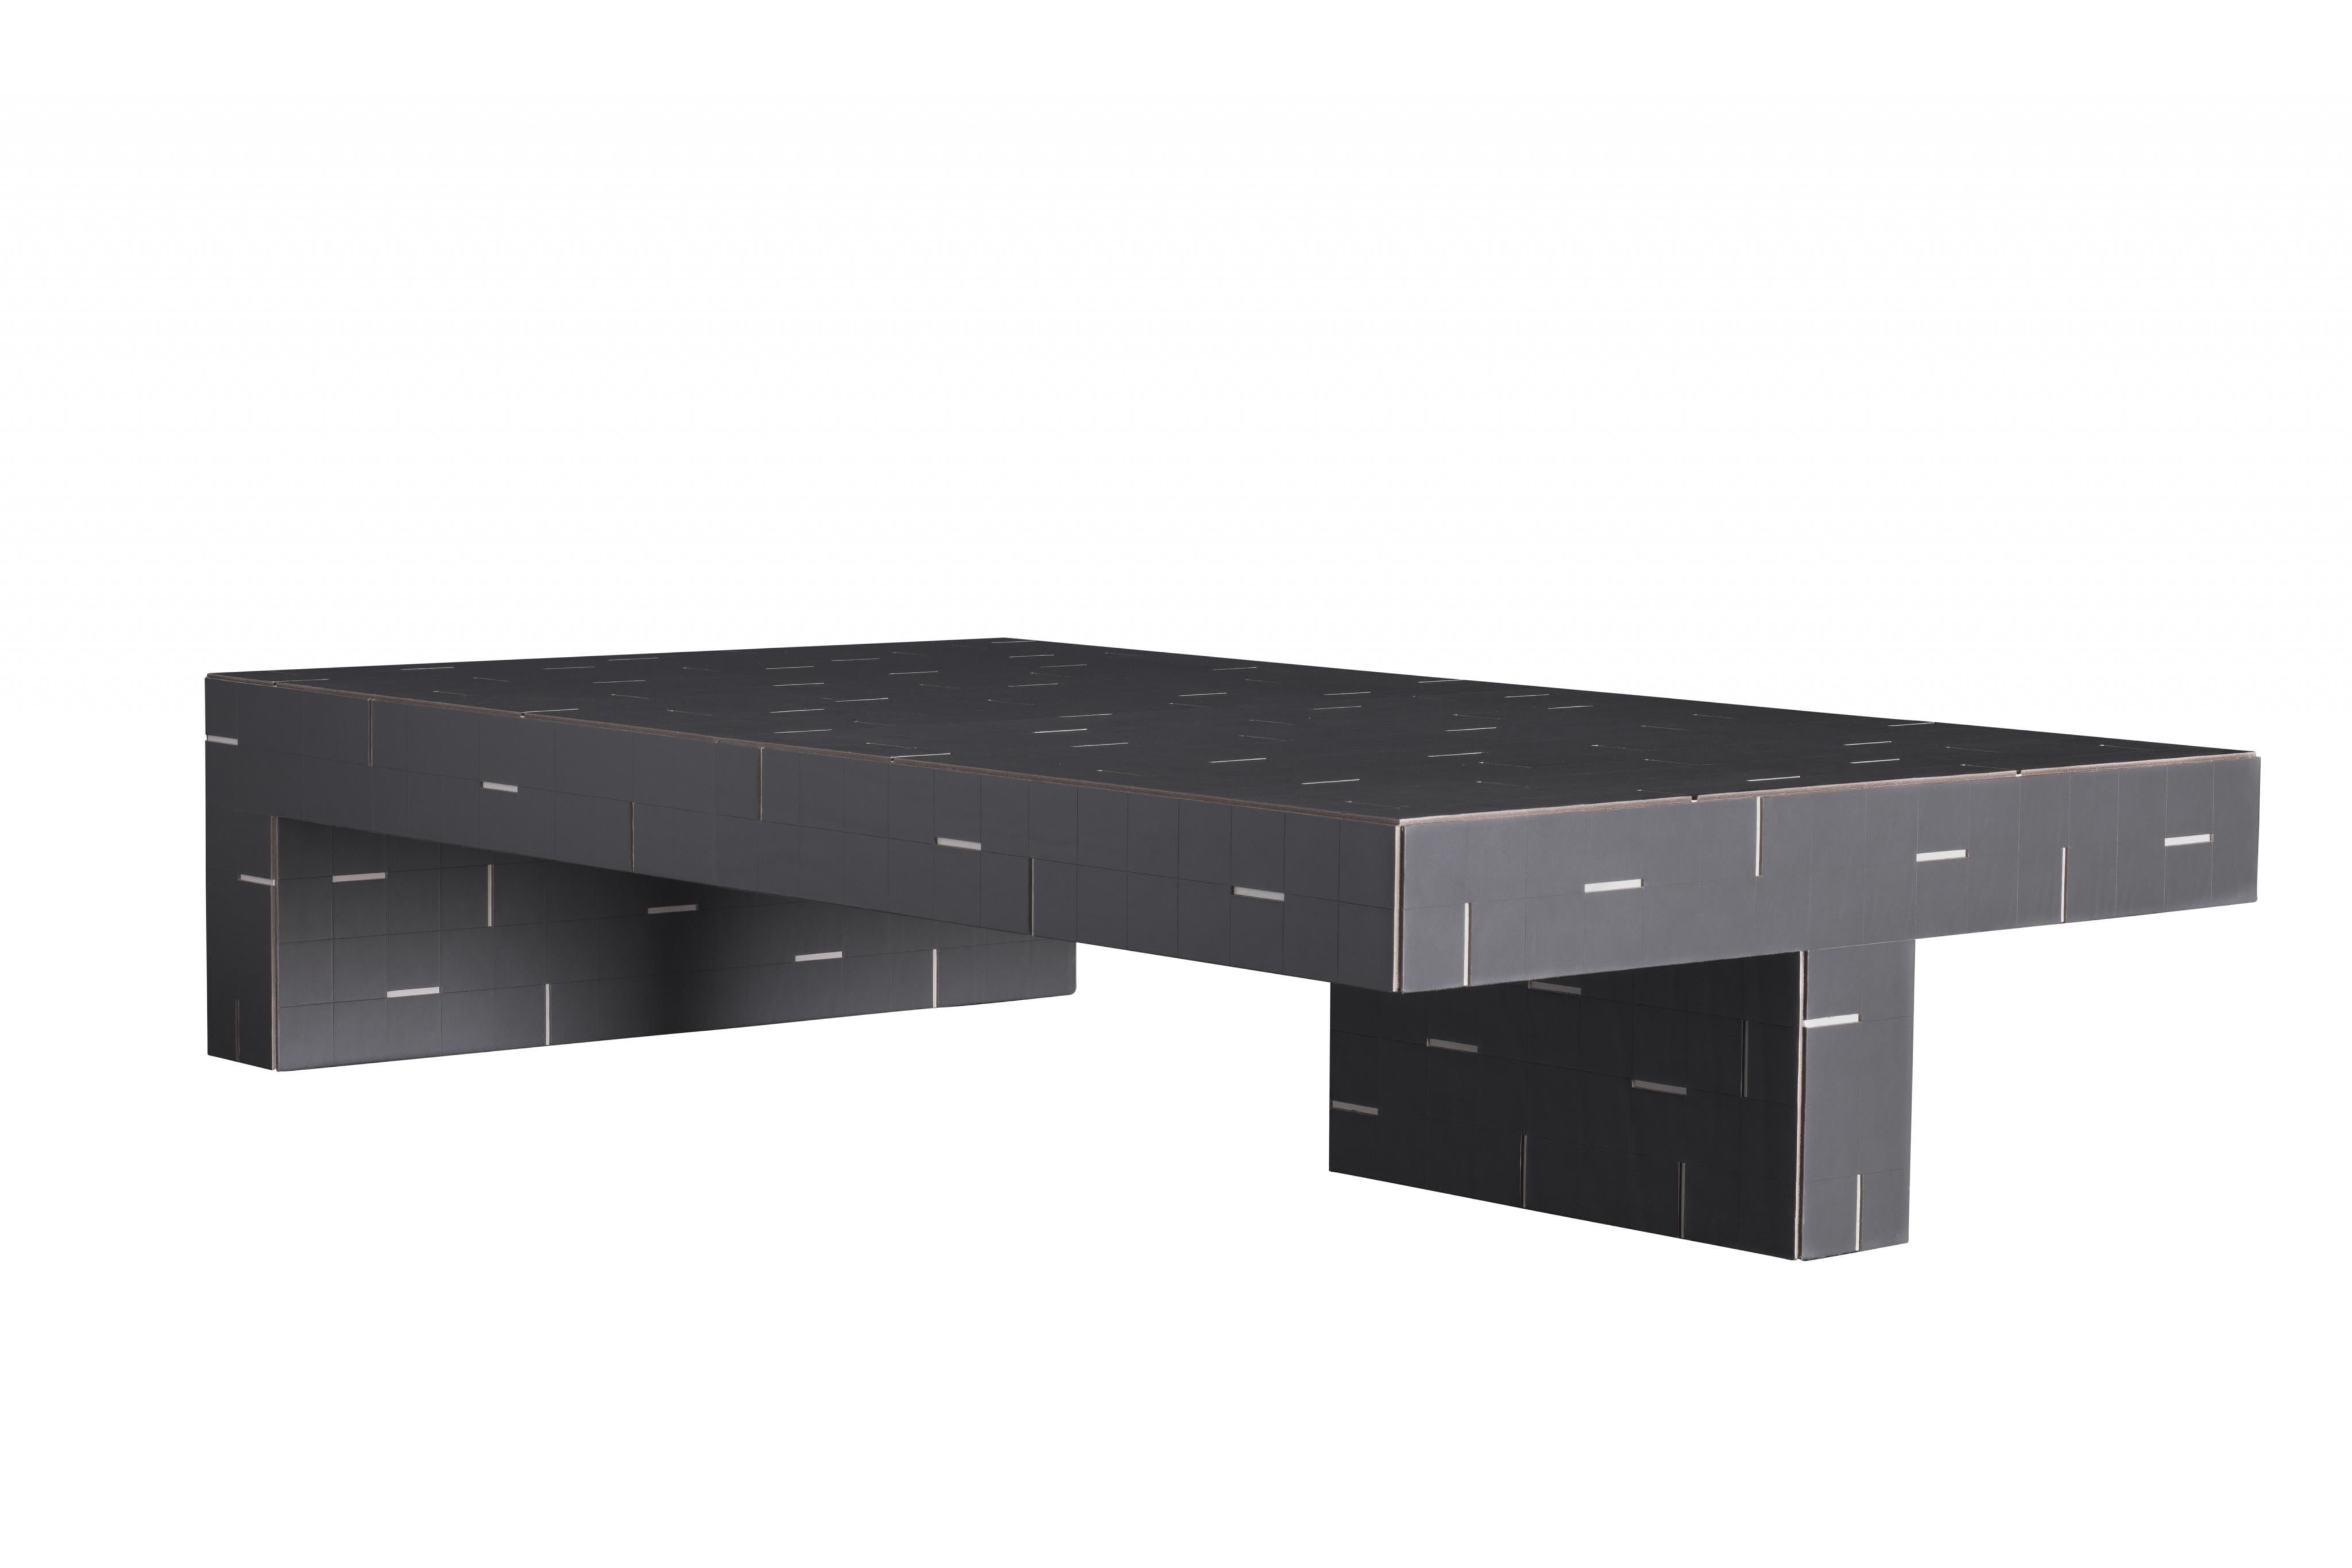 Atari Coffee Table II -- Stephane Parmentier x Giobagnara

Product available only in saddle leather. See photo for recommended color combinations.

Embracing sleek designs and beautiful materials, the Stephane Parmentier Collection for Giobagnara